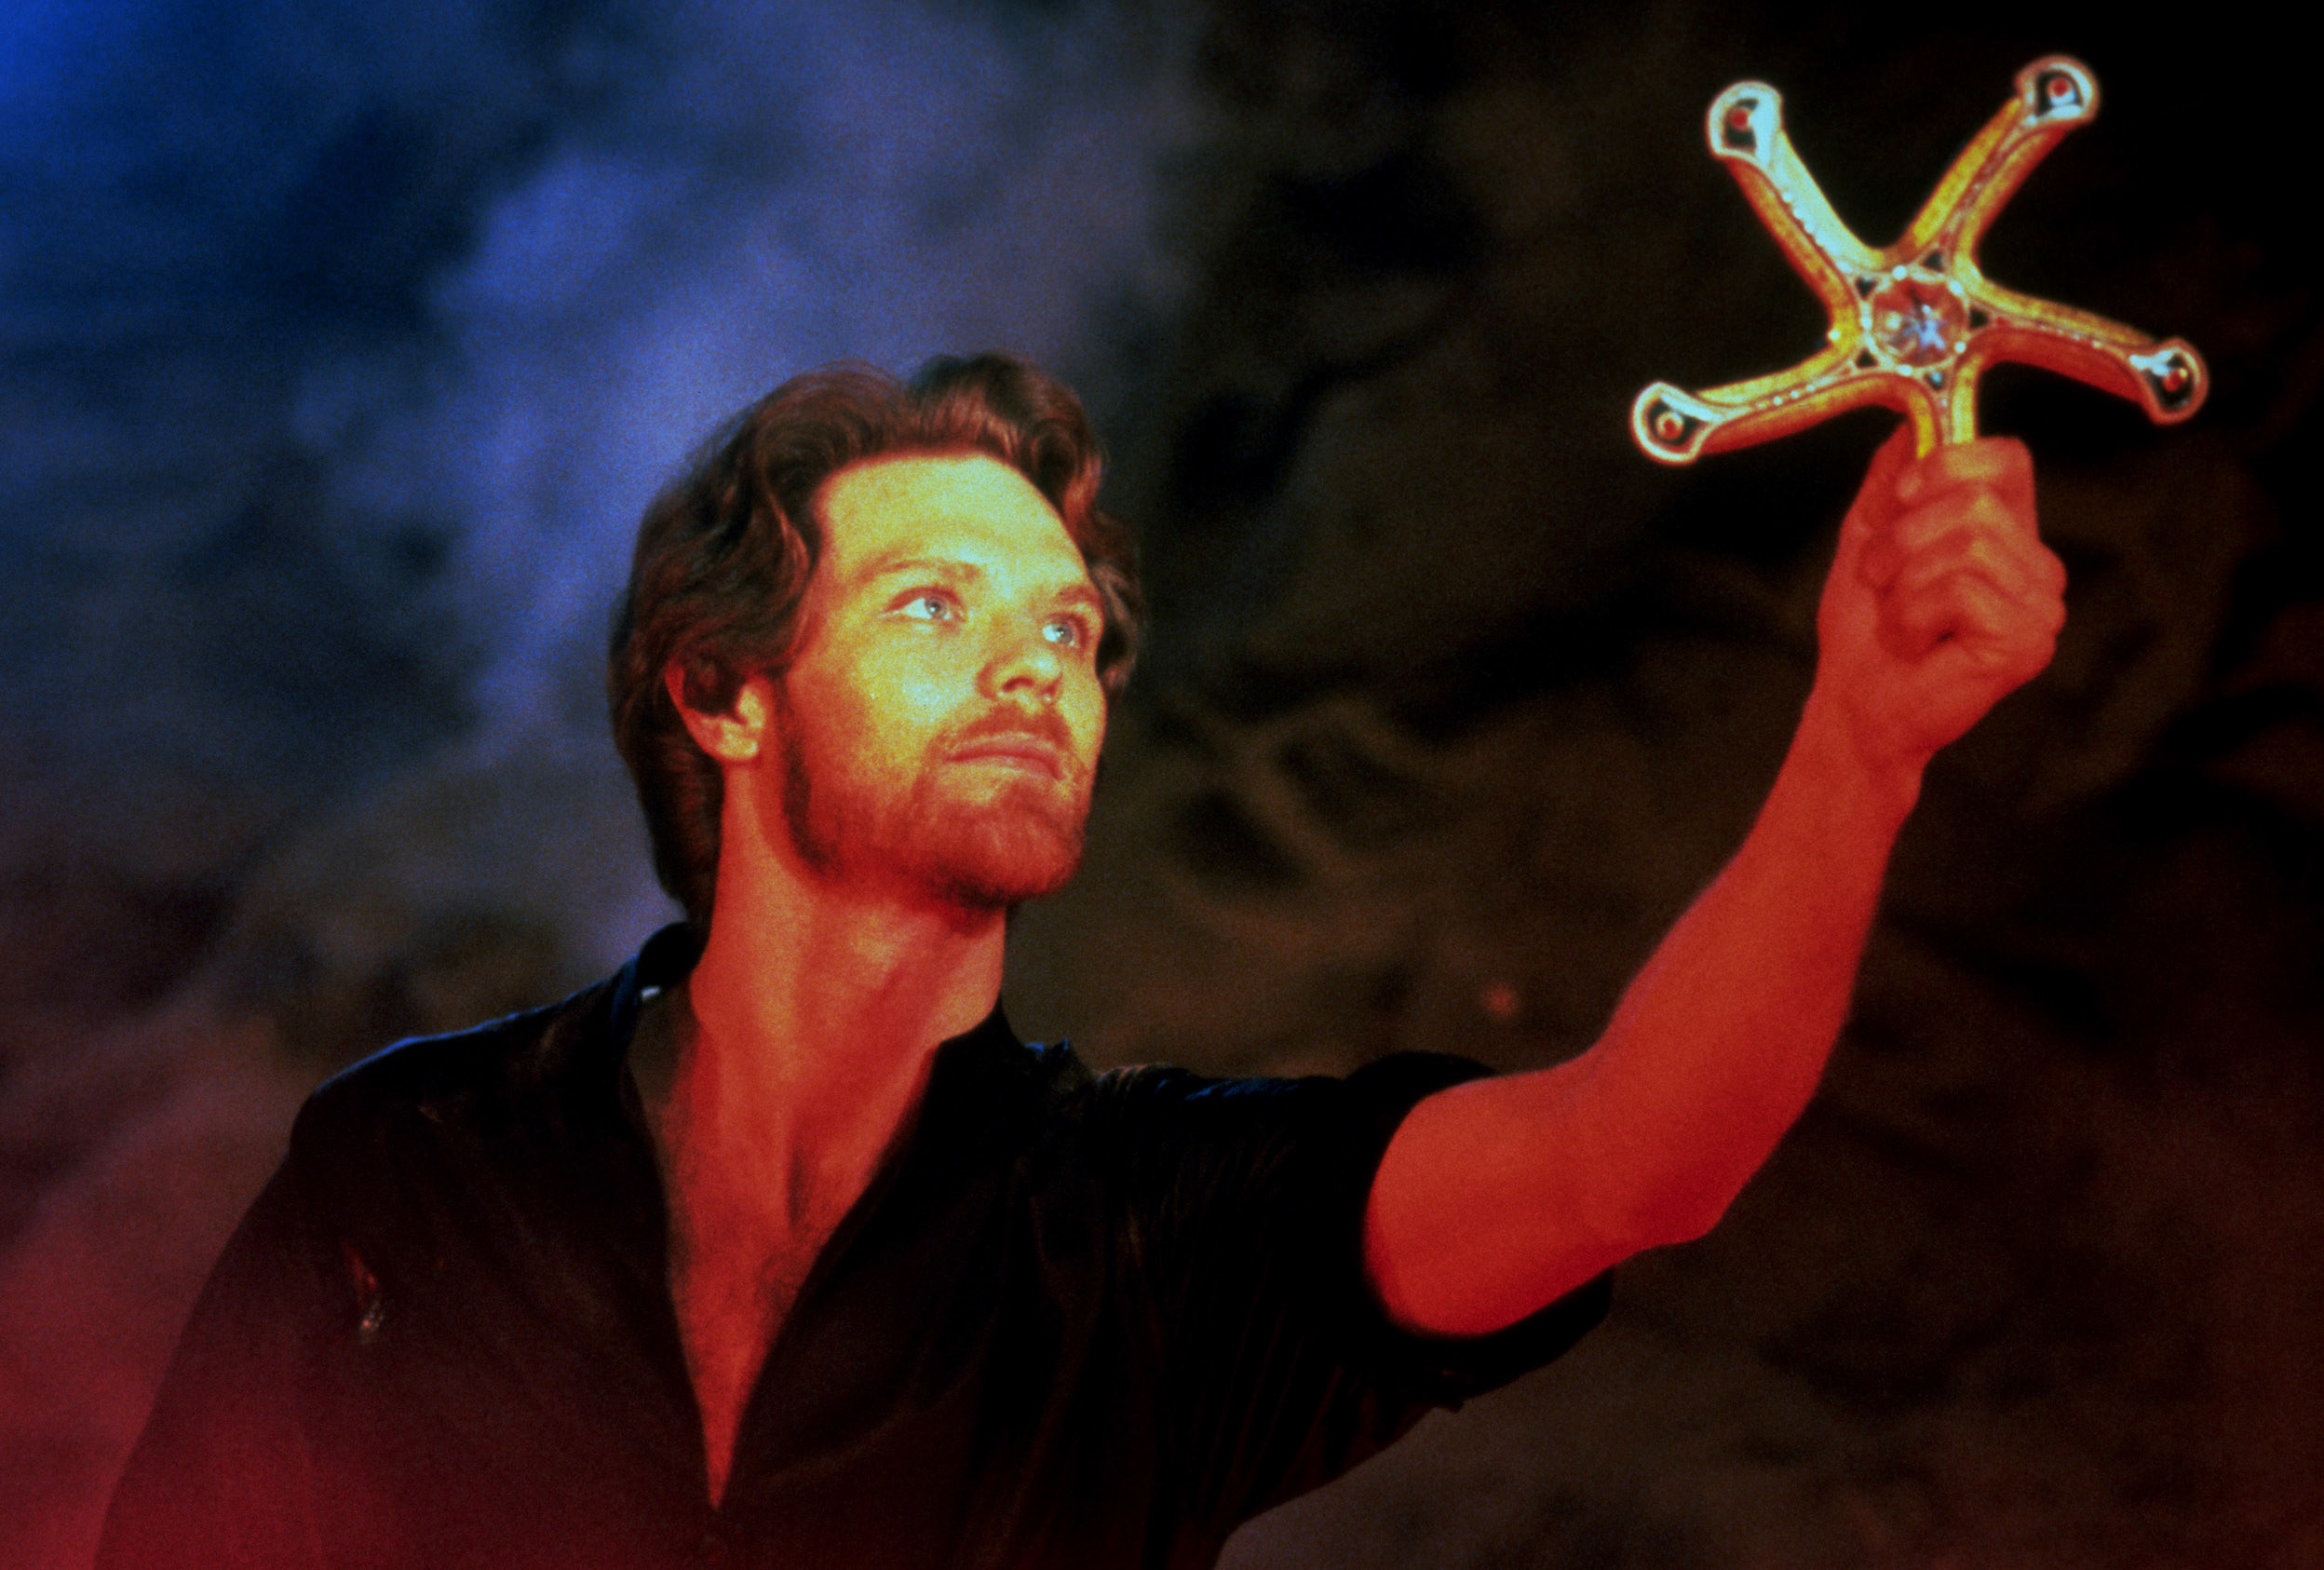 Ken Marshall embraces The Glaive in &quot;Krull&quot;